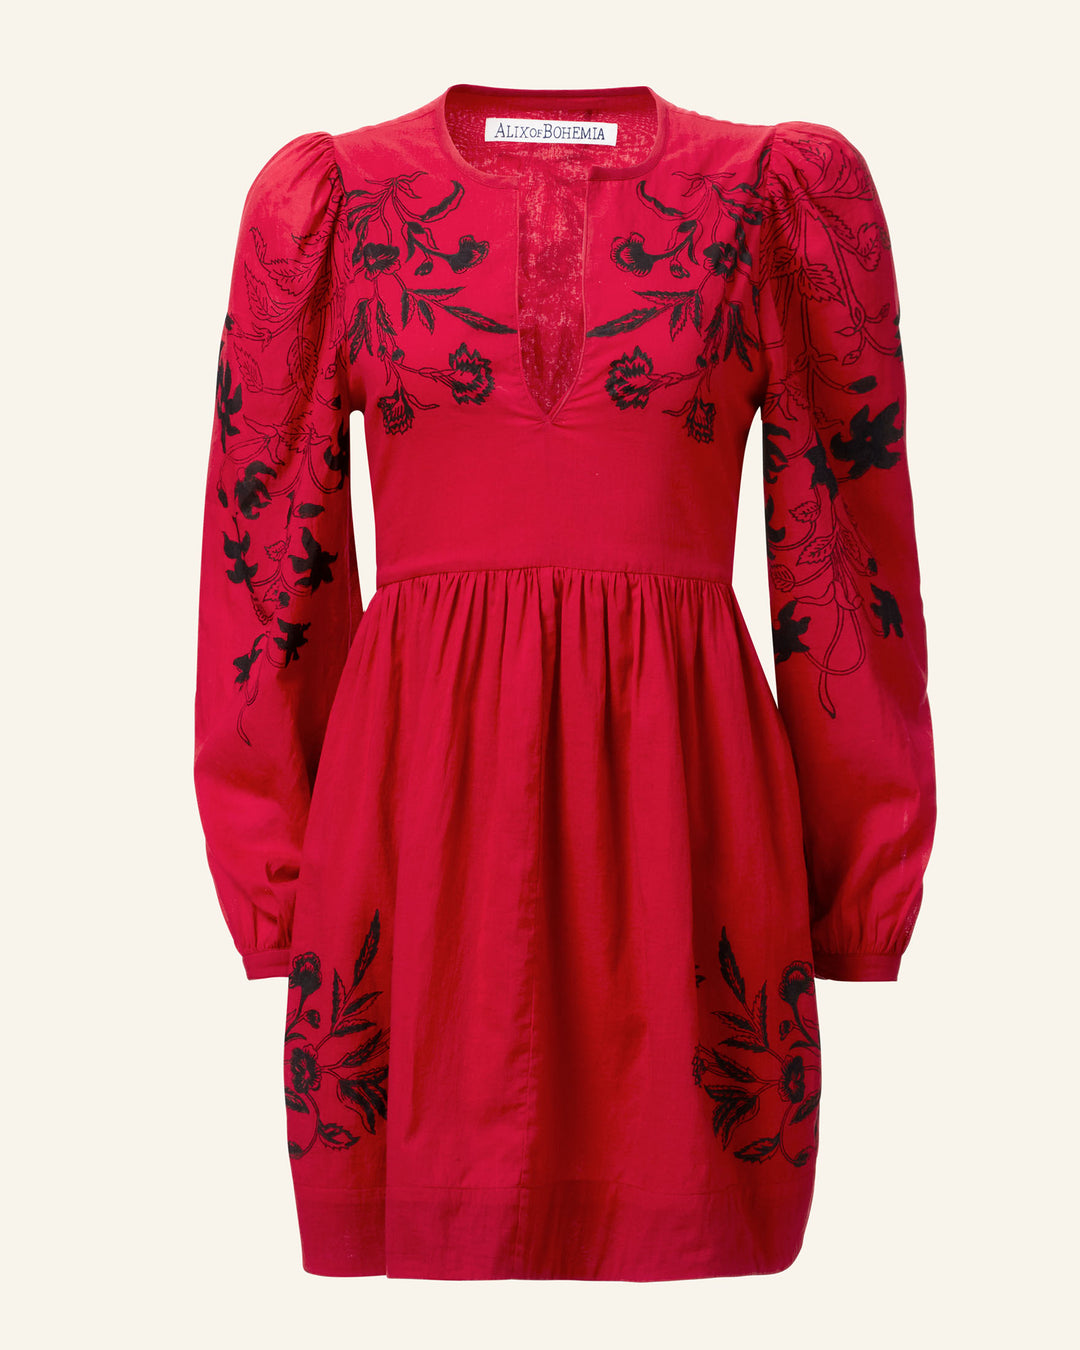 Winslow Cherry Lily Valley Dress